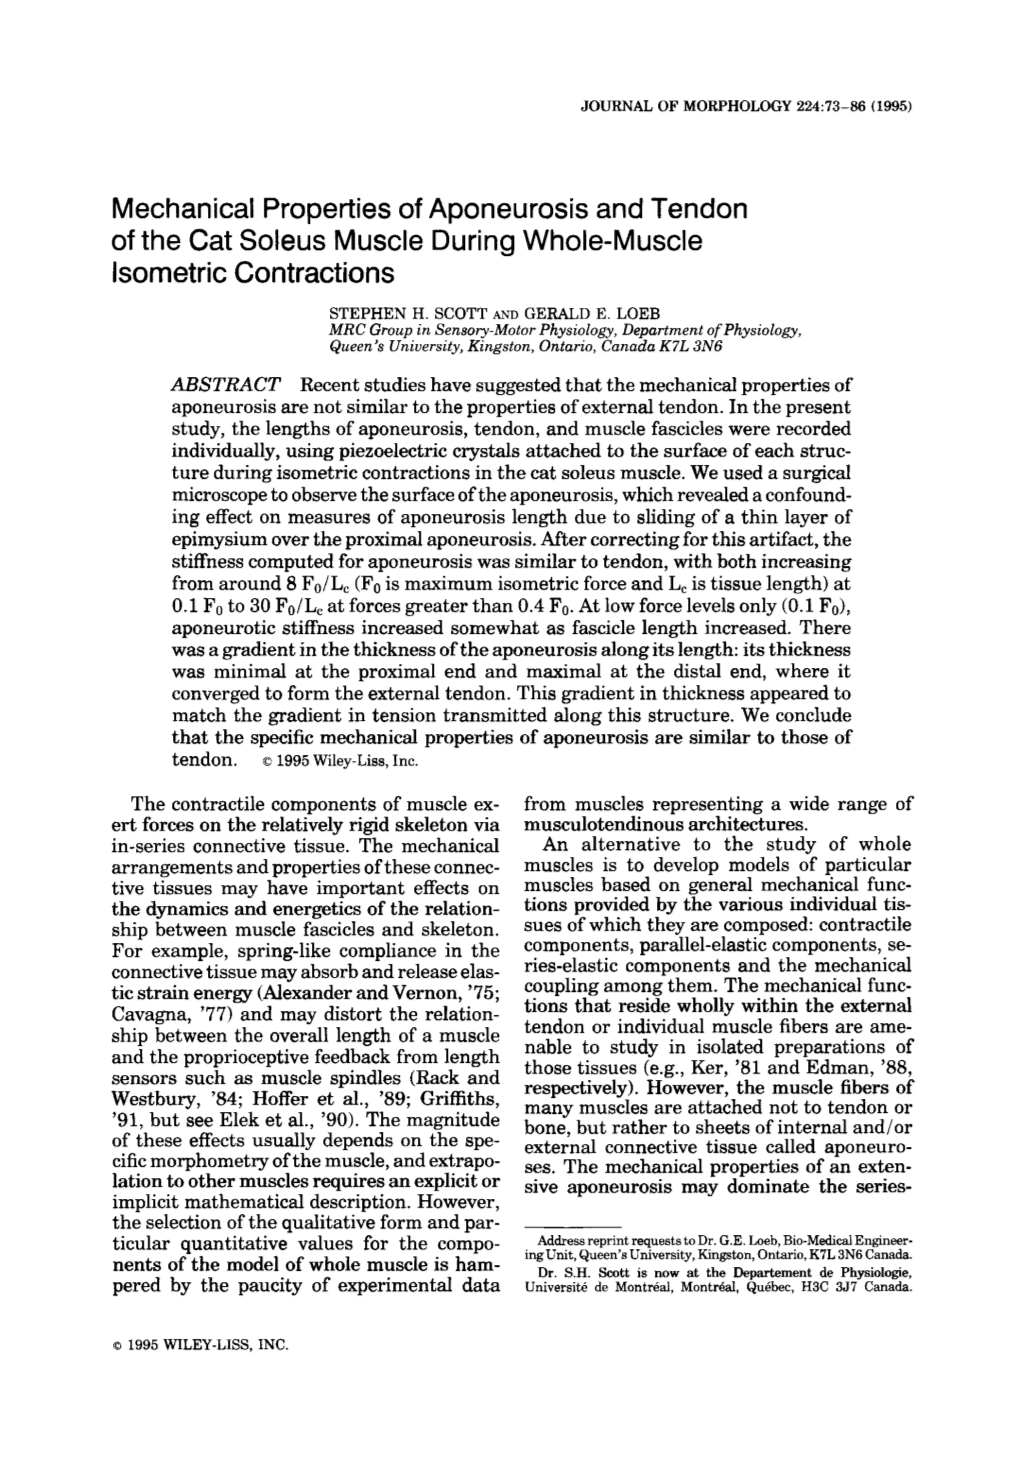 Mechanical Properties of Aponeurosis and Tendon of the Cat Soleus Muscle During Whole-Muscle Isometric Contractions